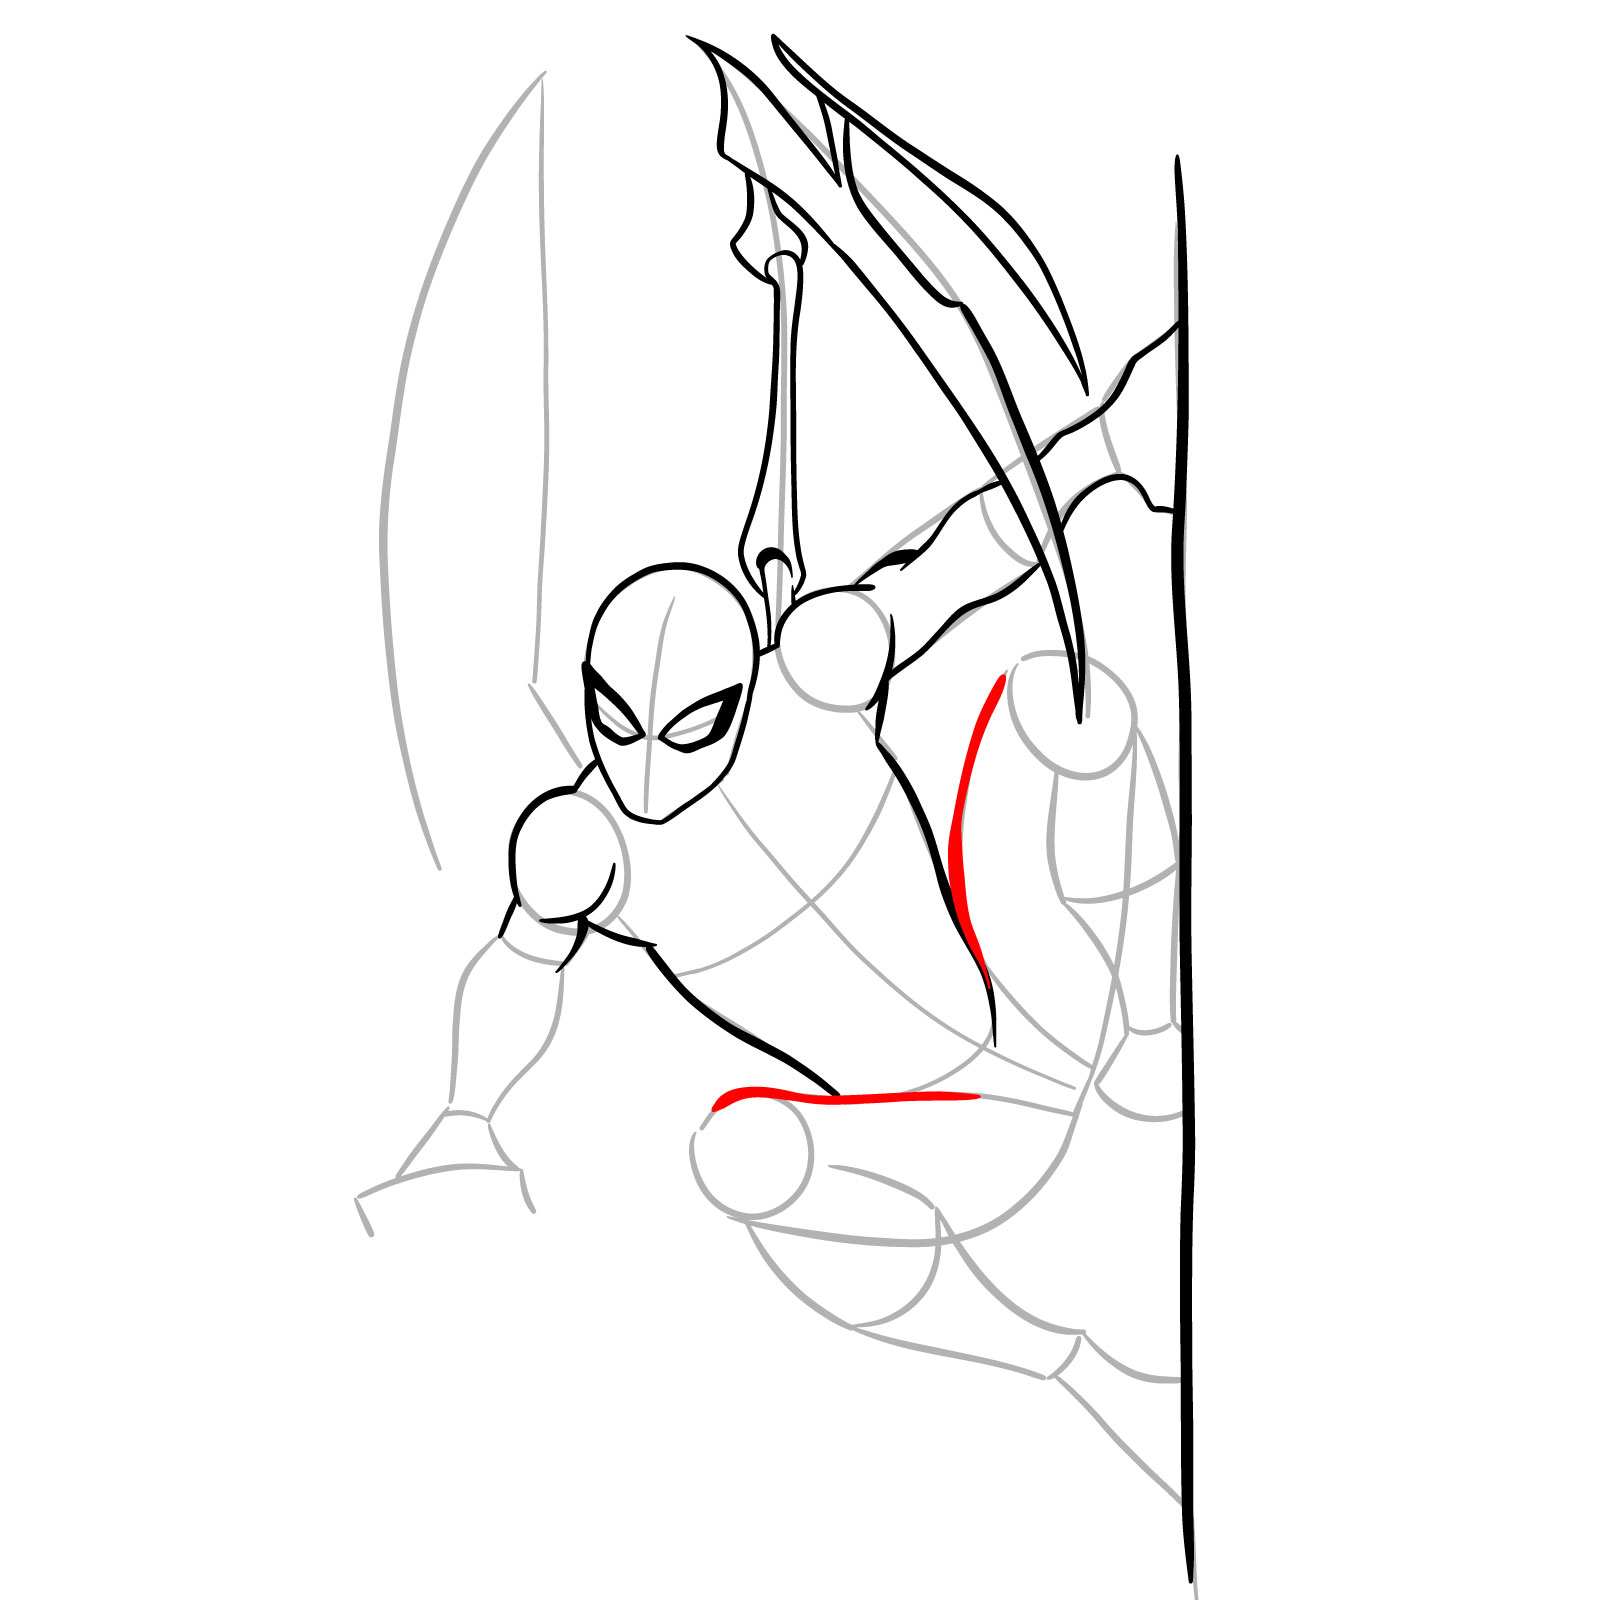 How to draw The Superior Spider-Man - step 17